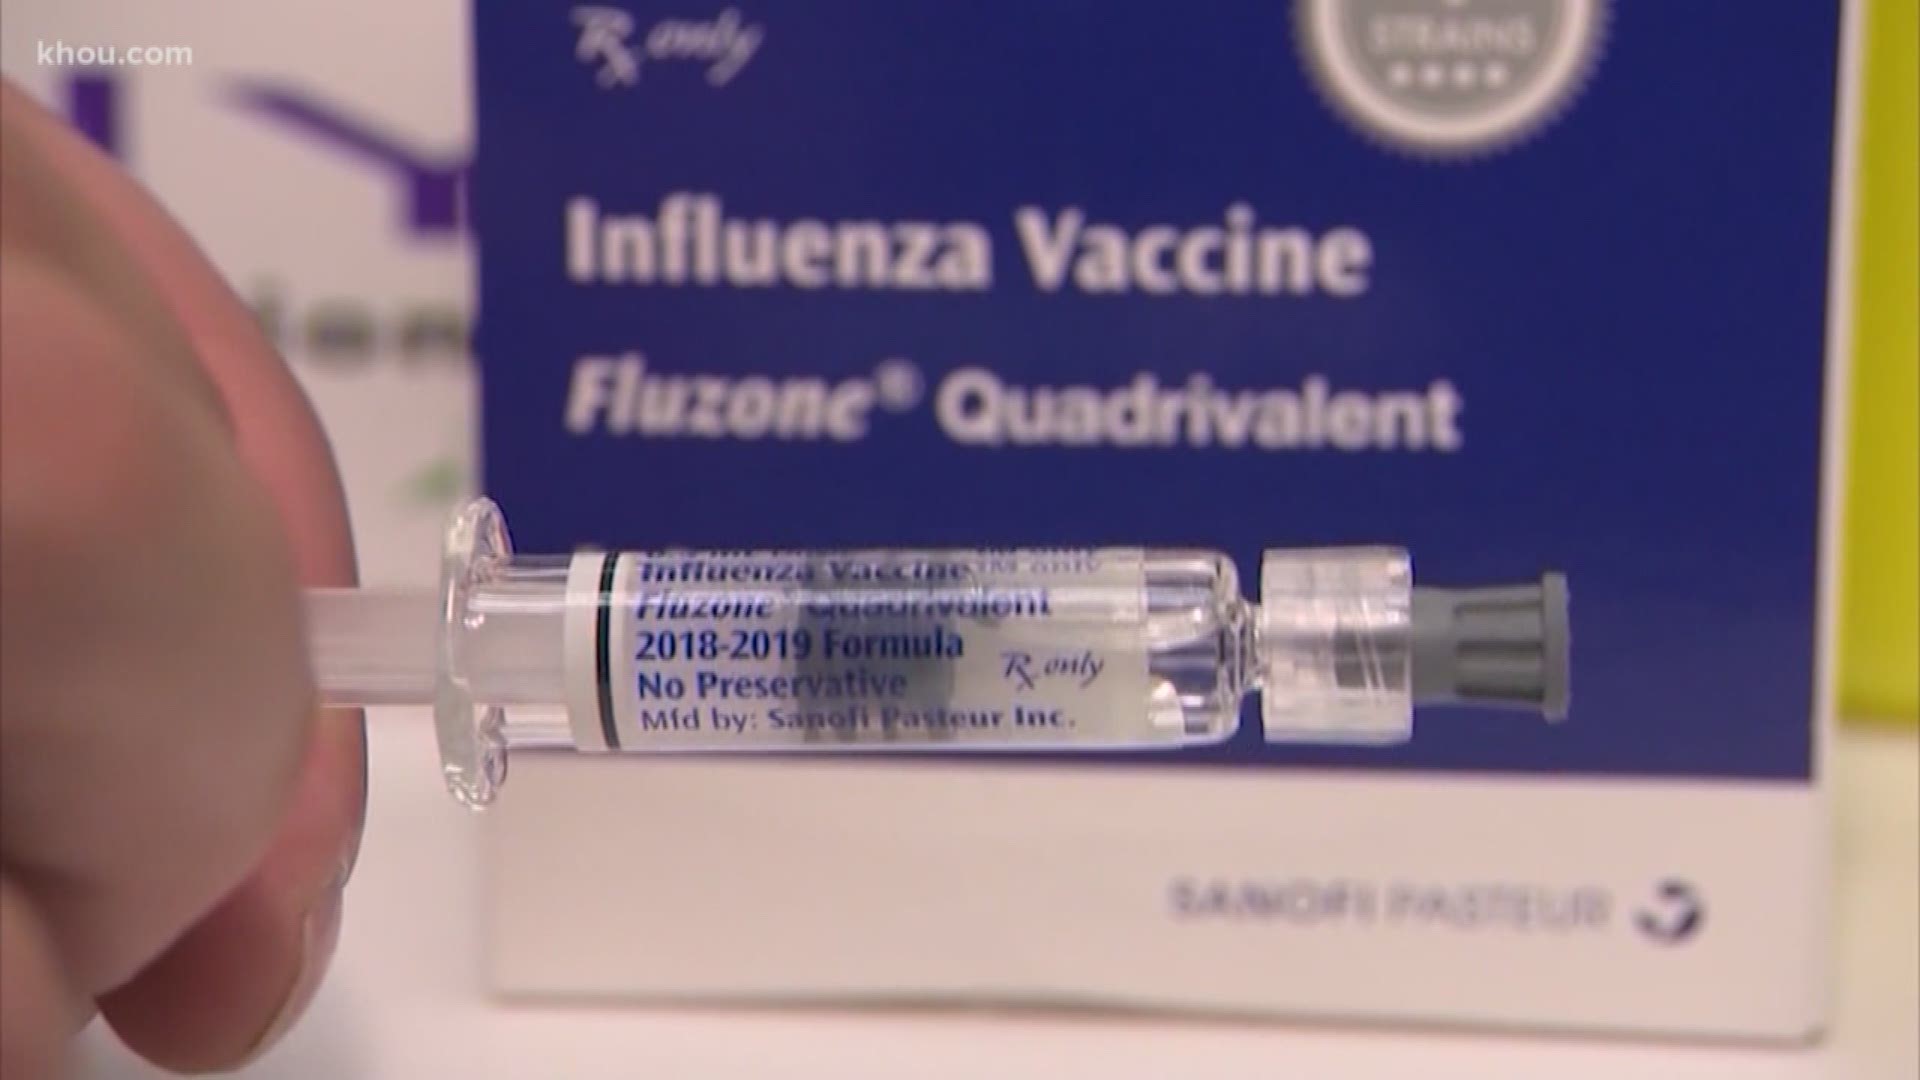 A baby boy in Harris County has died from the flu, becoming the first pediatric flu-related death in the Houston area this season.